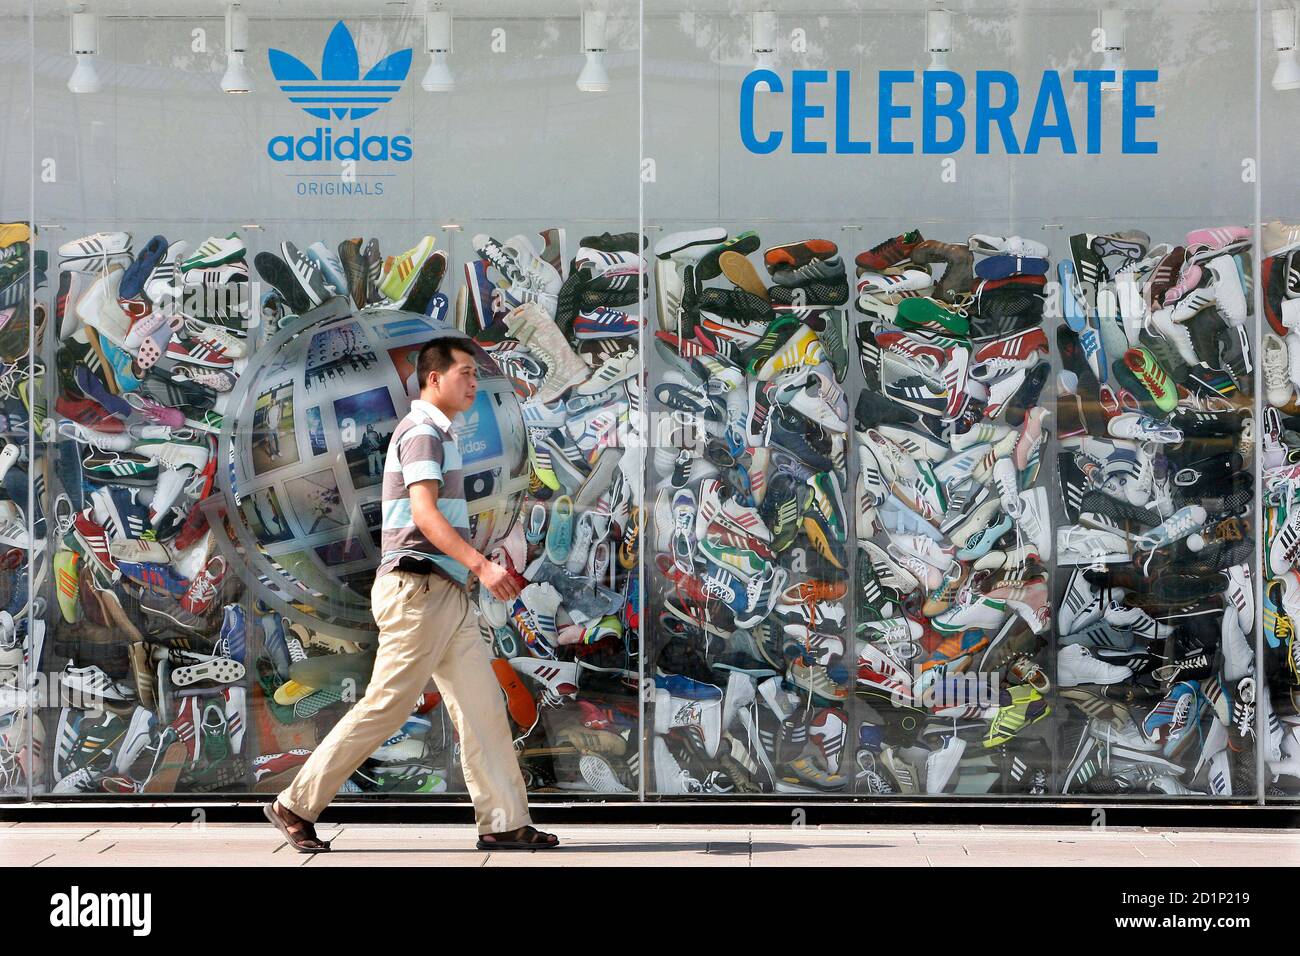 adidas store square one